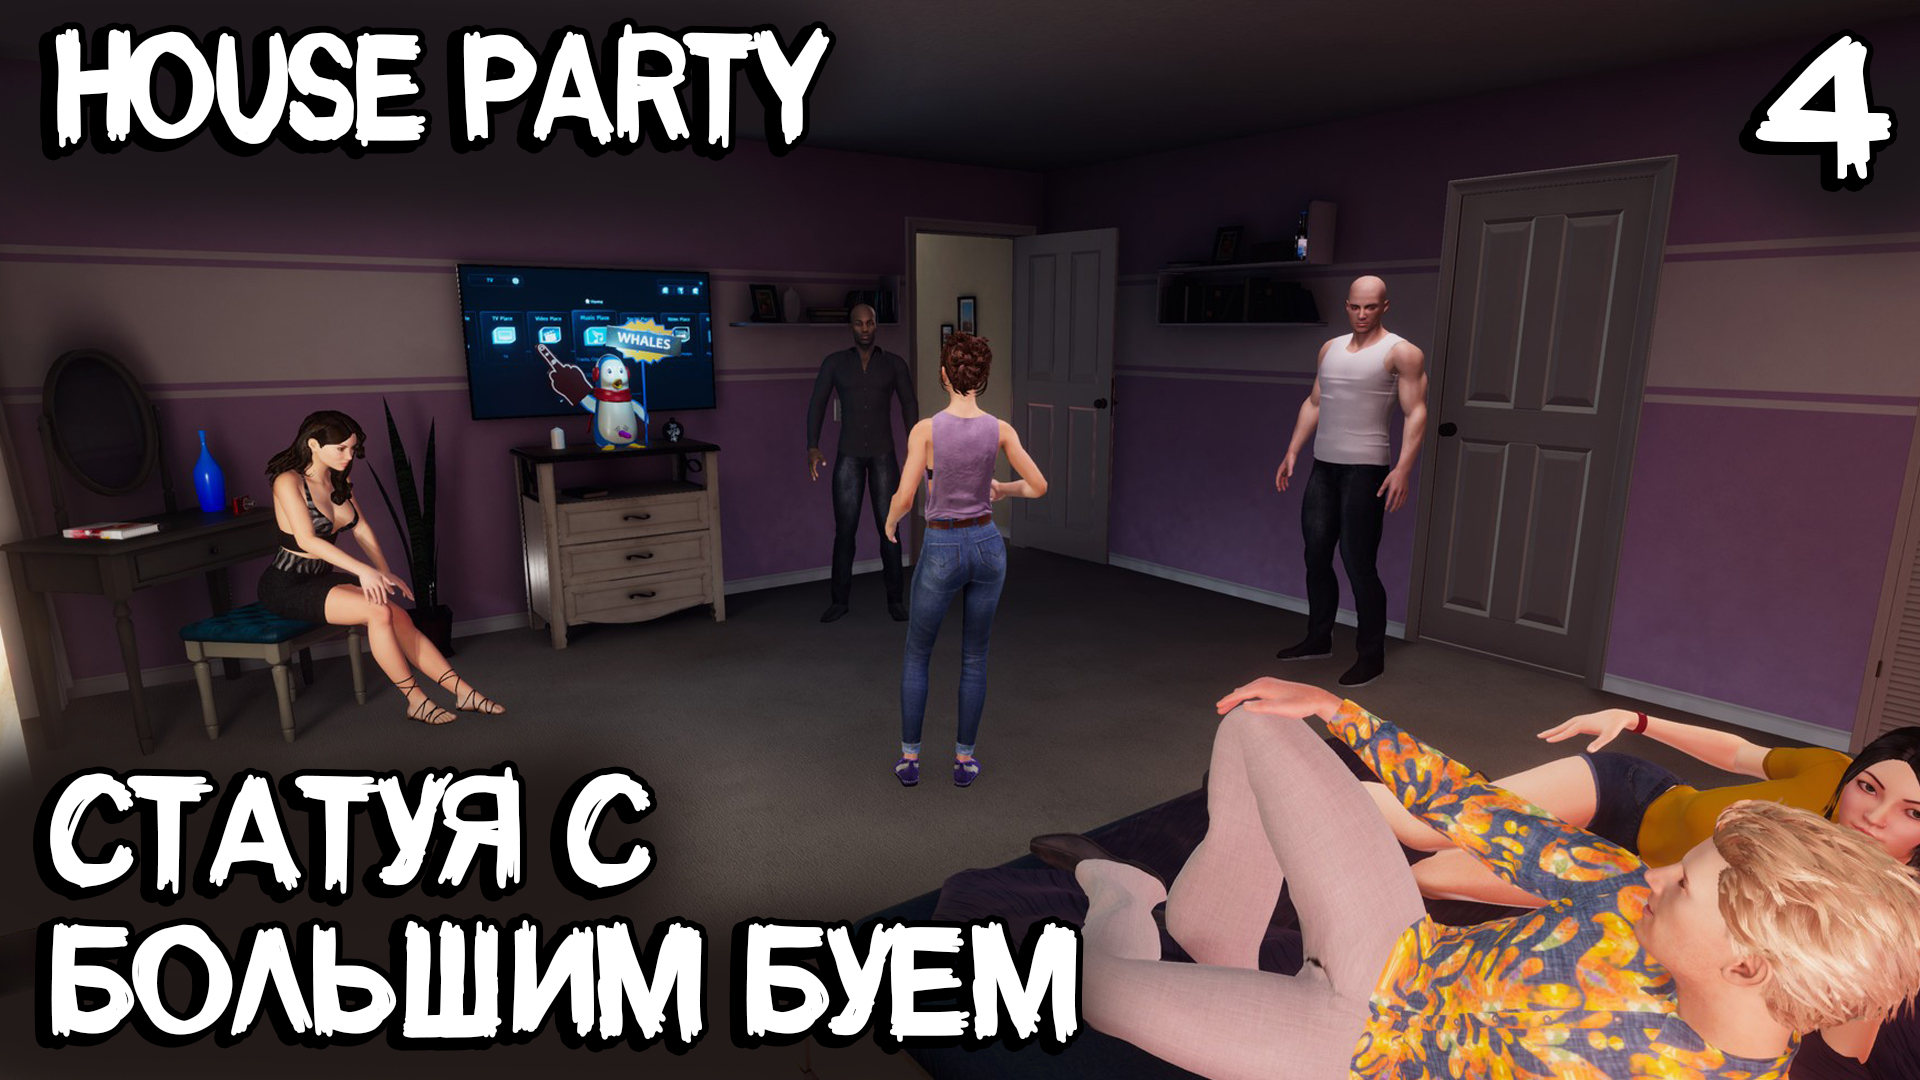 House party dance console command threesome